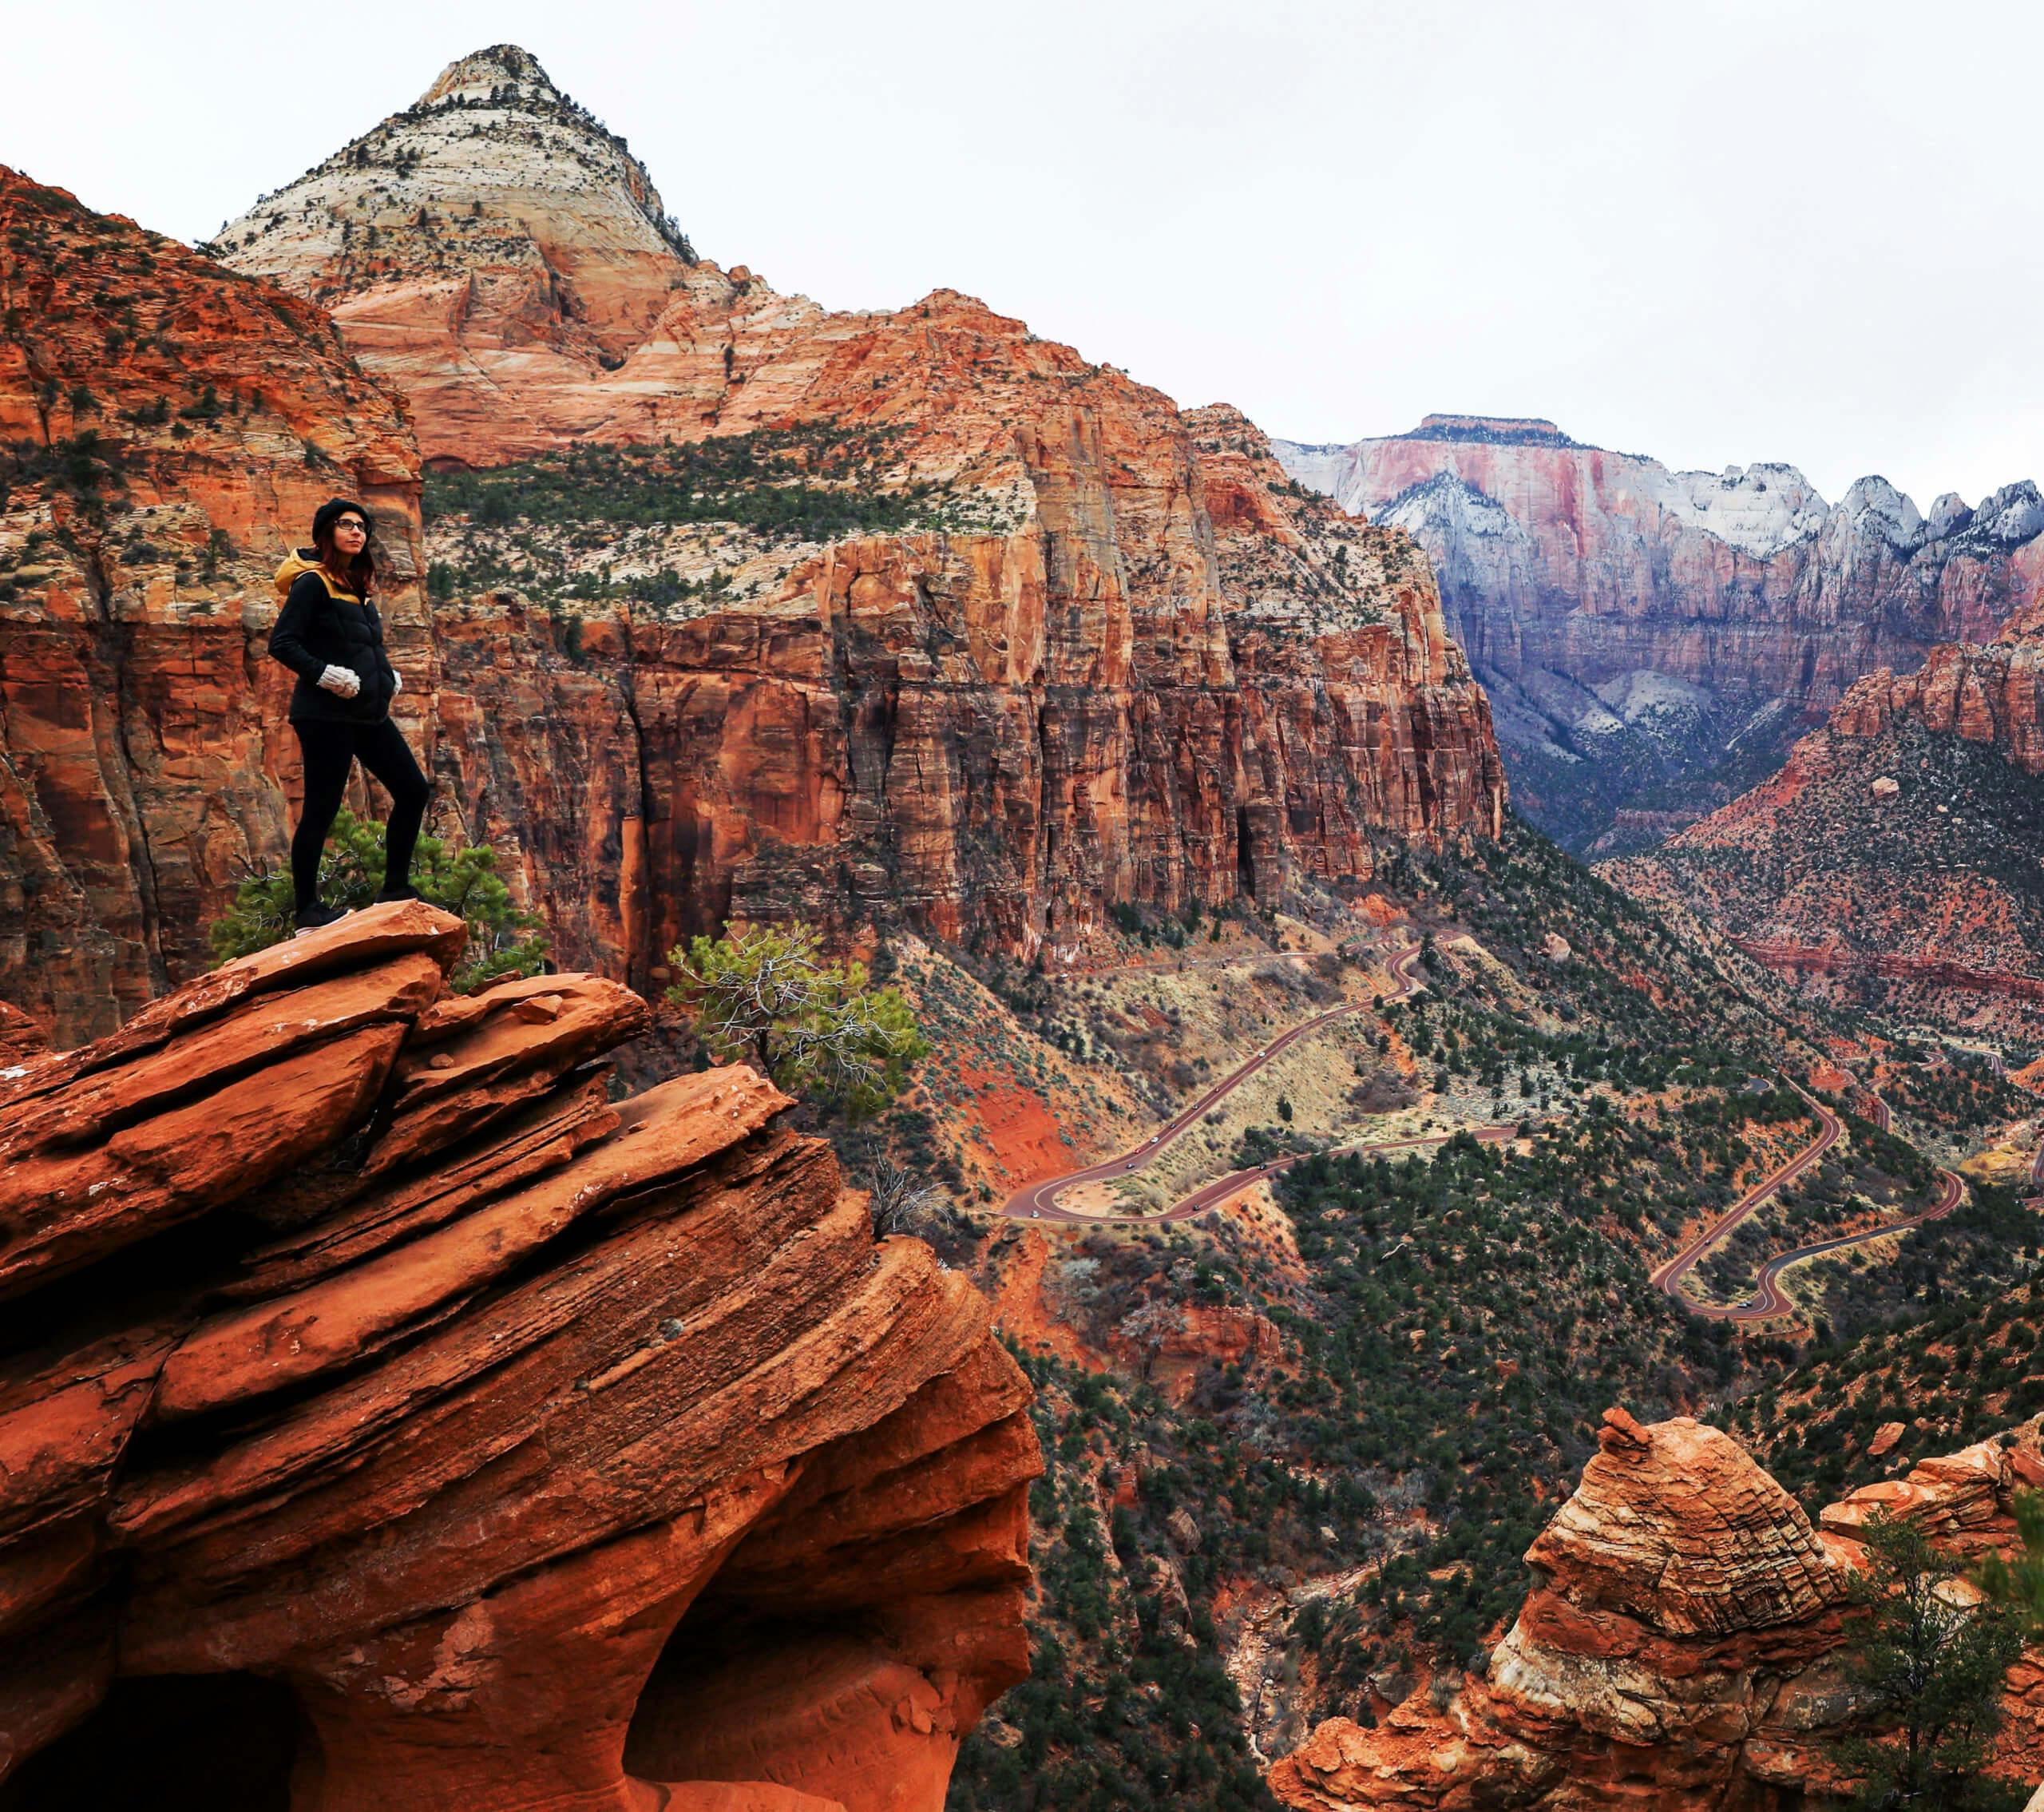 Hiker standing on a red rock formation with panoramic views of mountains